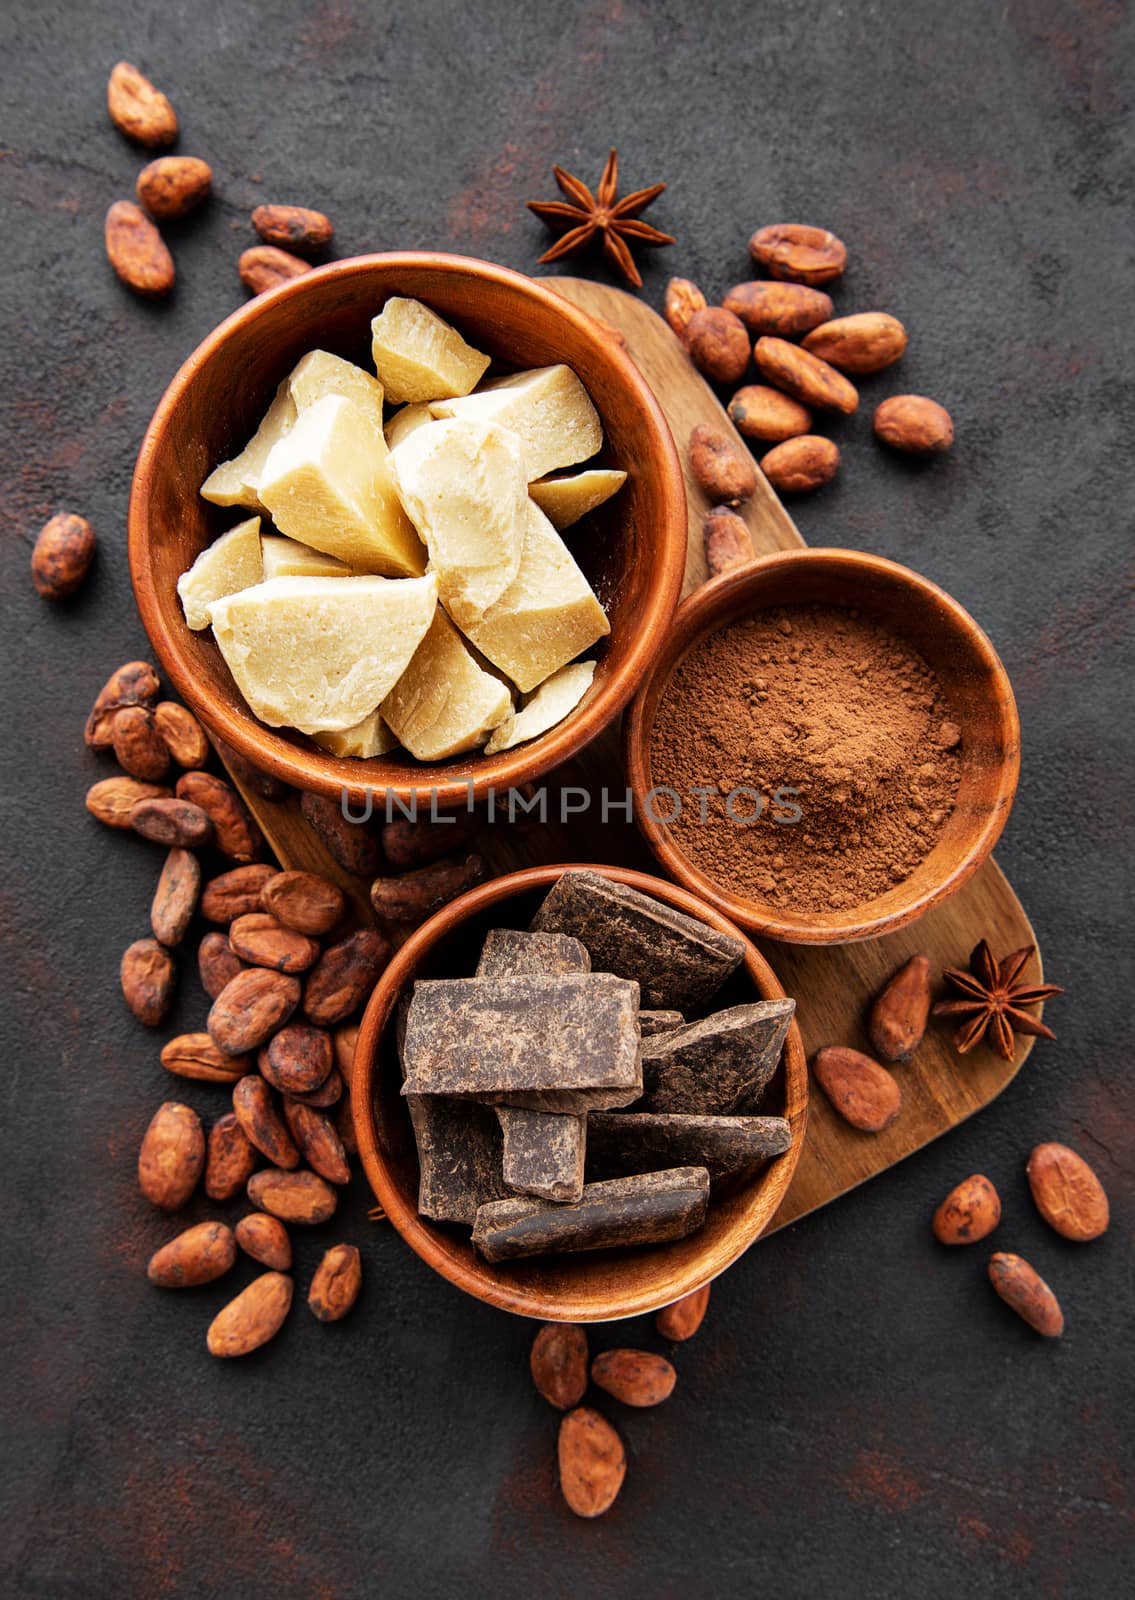 Cocoa beans, butter and chocolate by Almaje